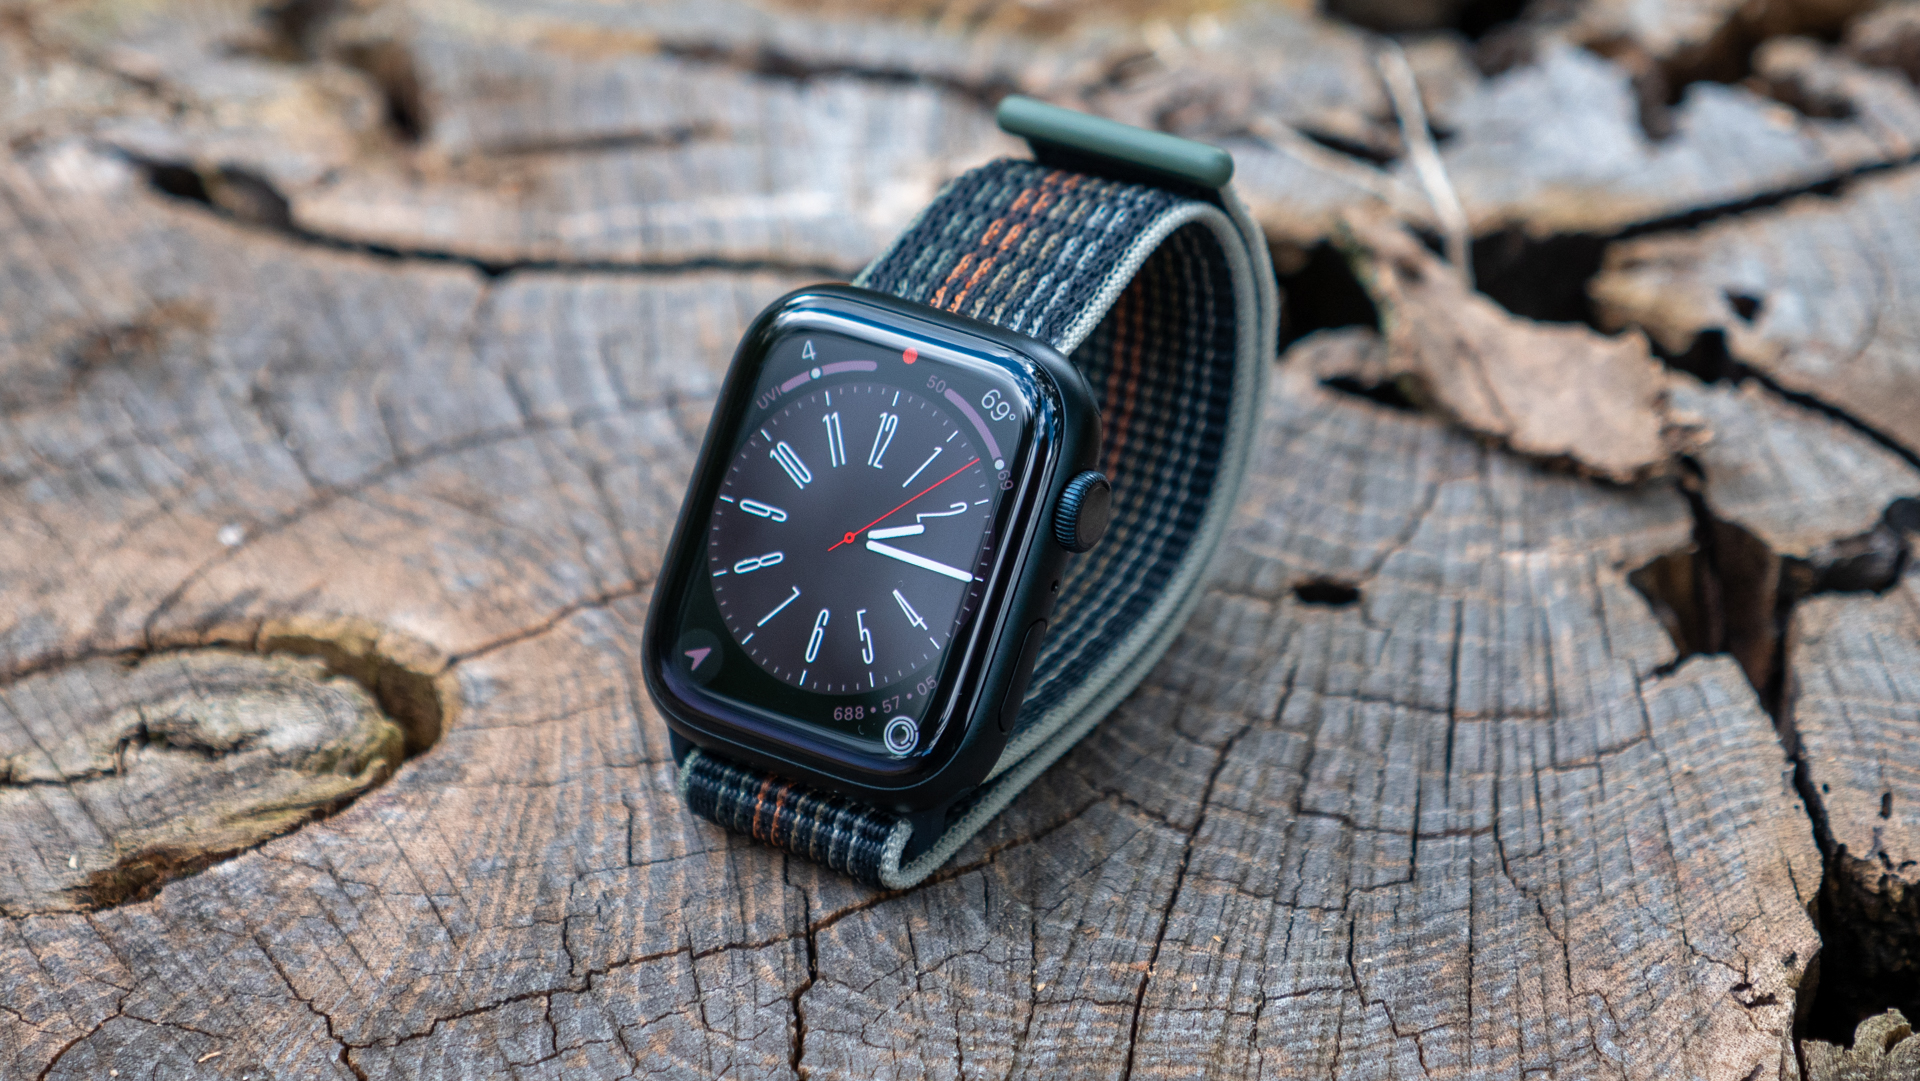 An Apple Watch Series 8 perched on a wooden stump displays the watch face.